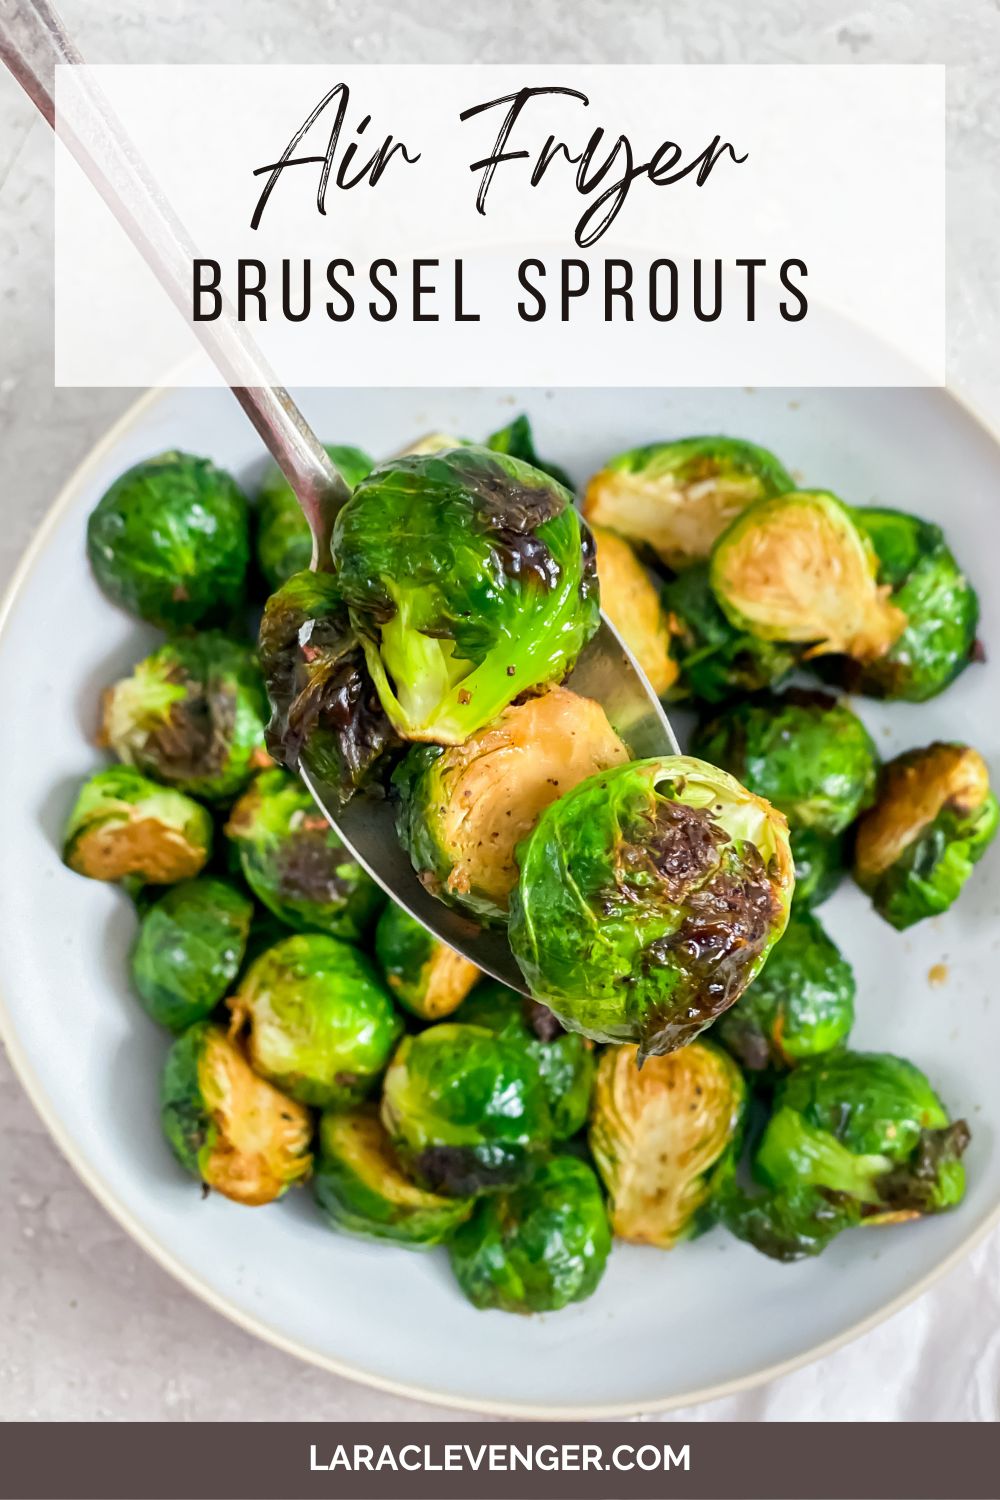 pinterst image for air fryer brussel sprouts with text overlay